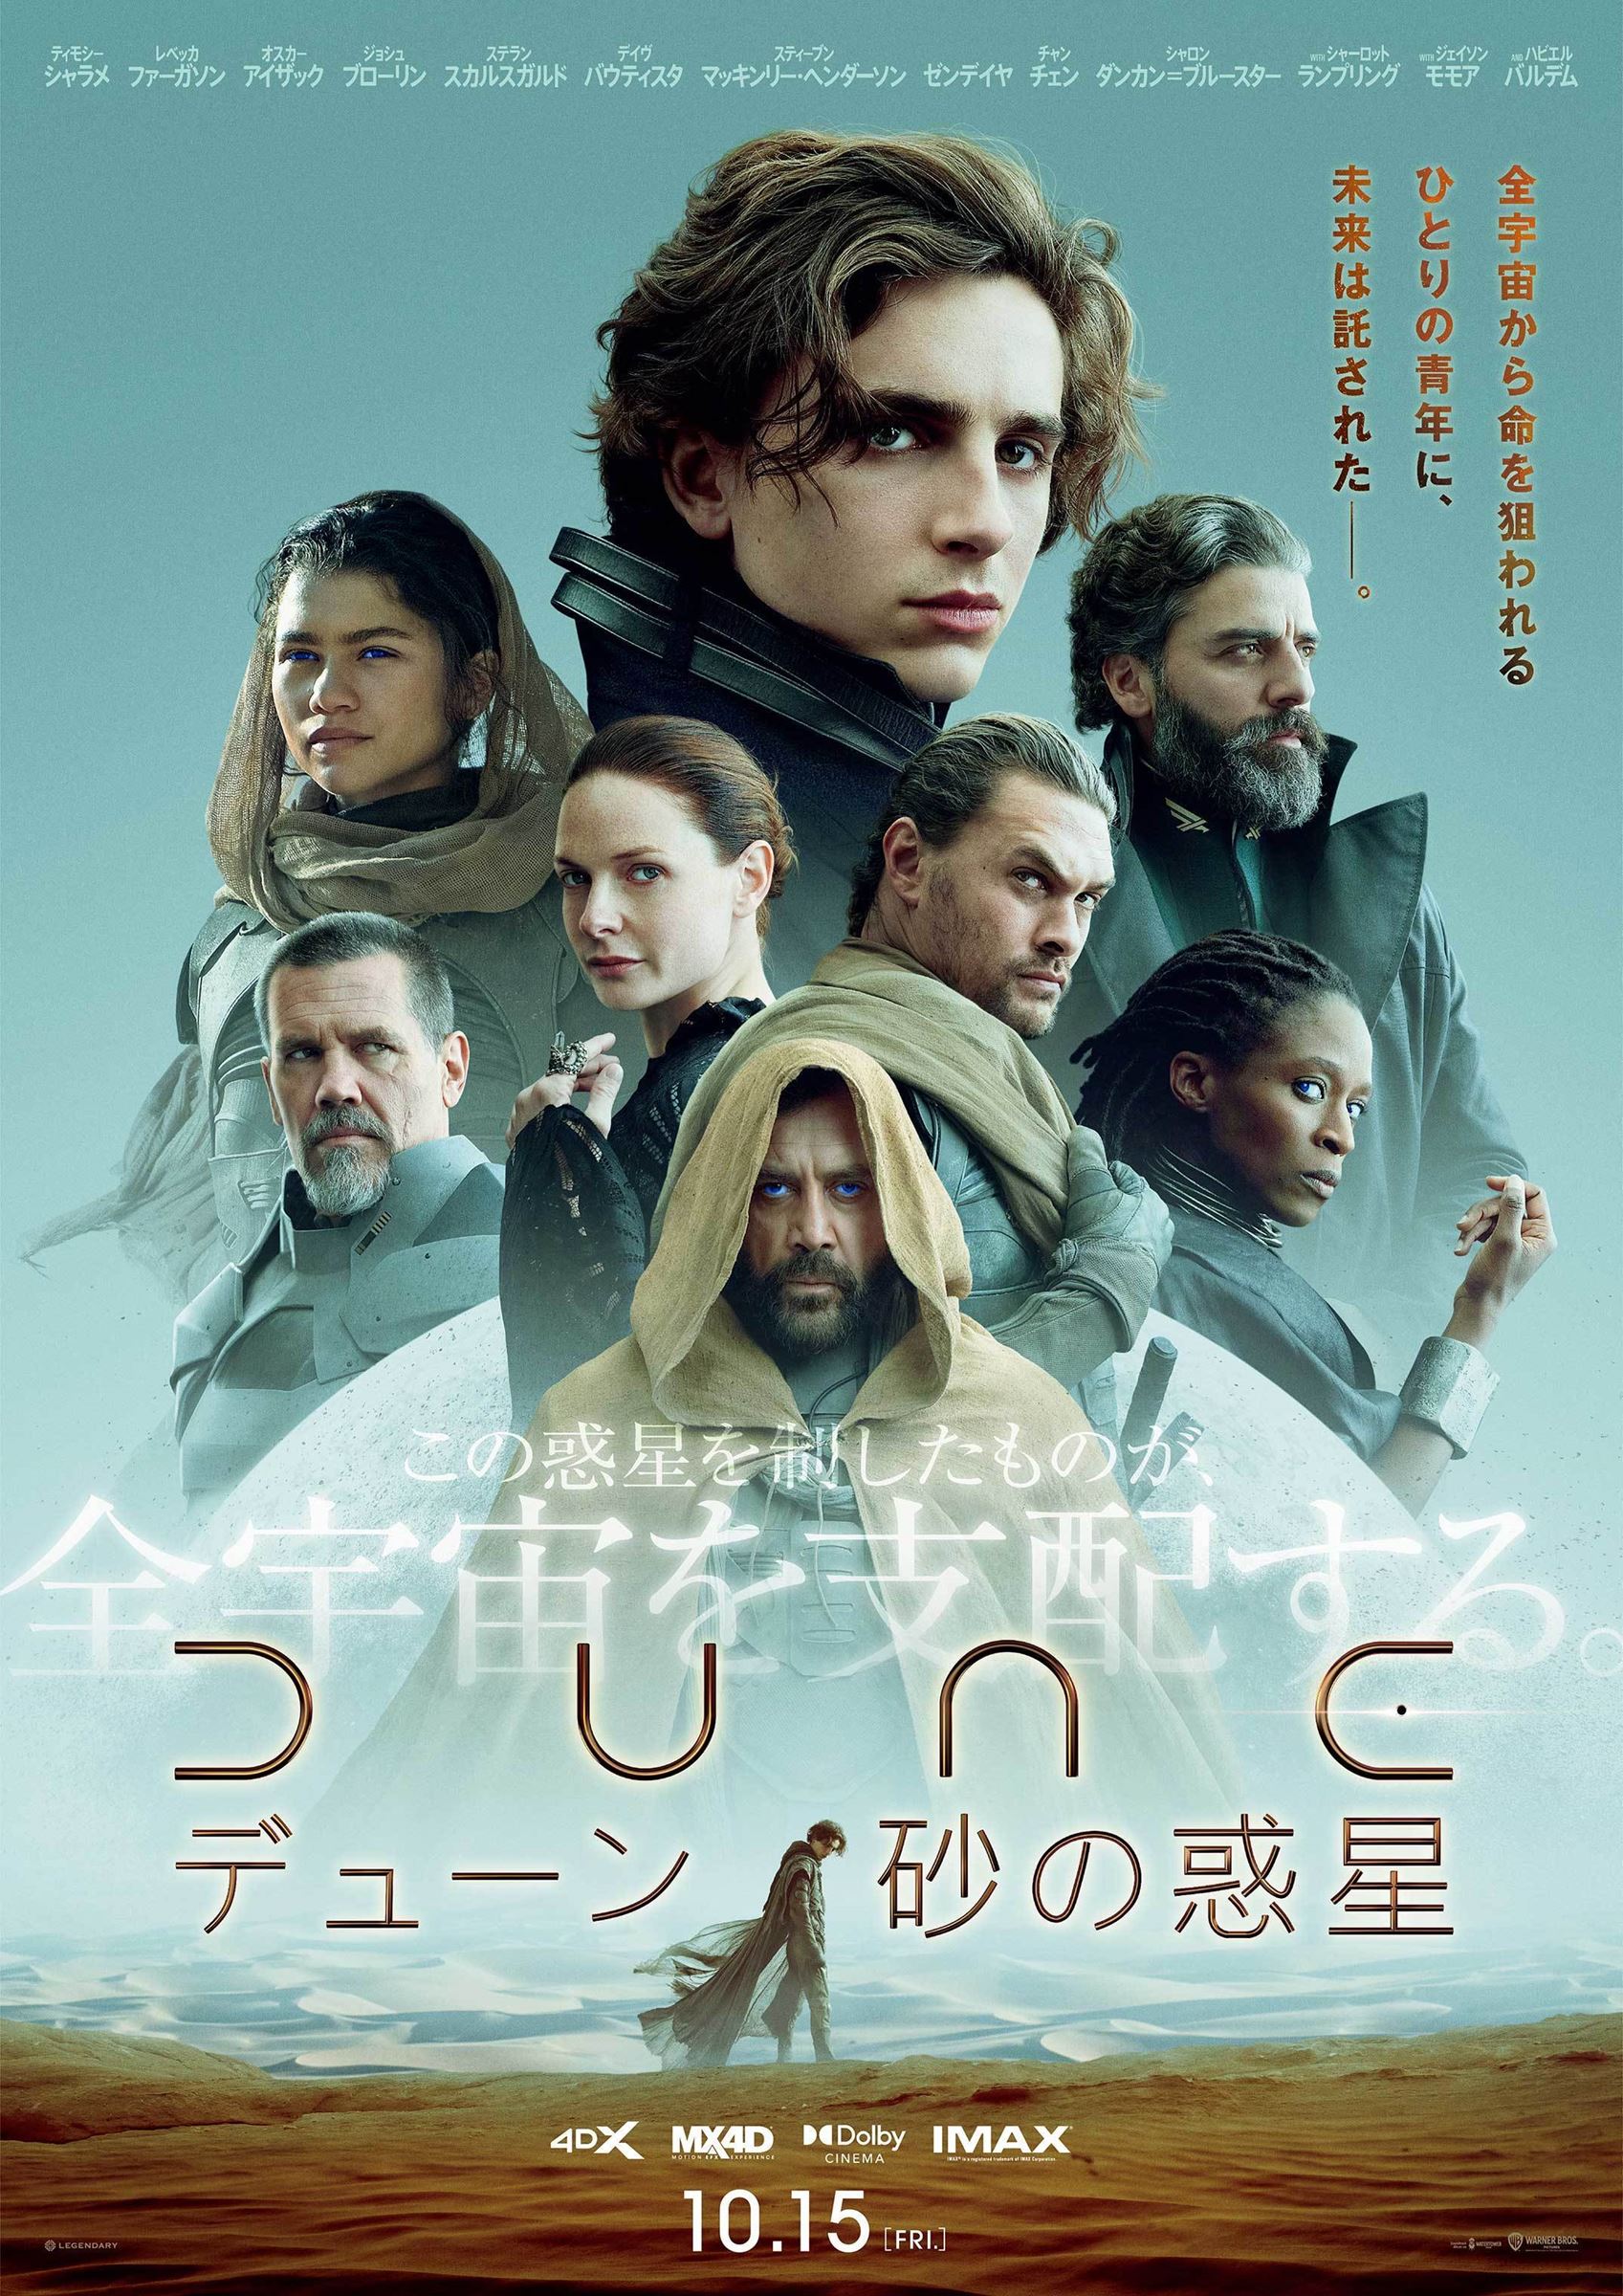 『DUNE/デューン 砂の惑星』 (c)2020 Legendary and Warner Bros. Entertainment Inc. All Rights Reserved